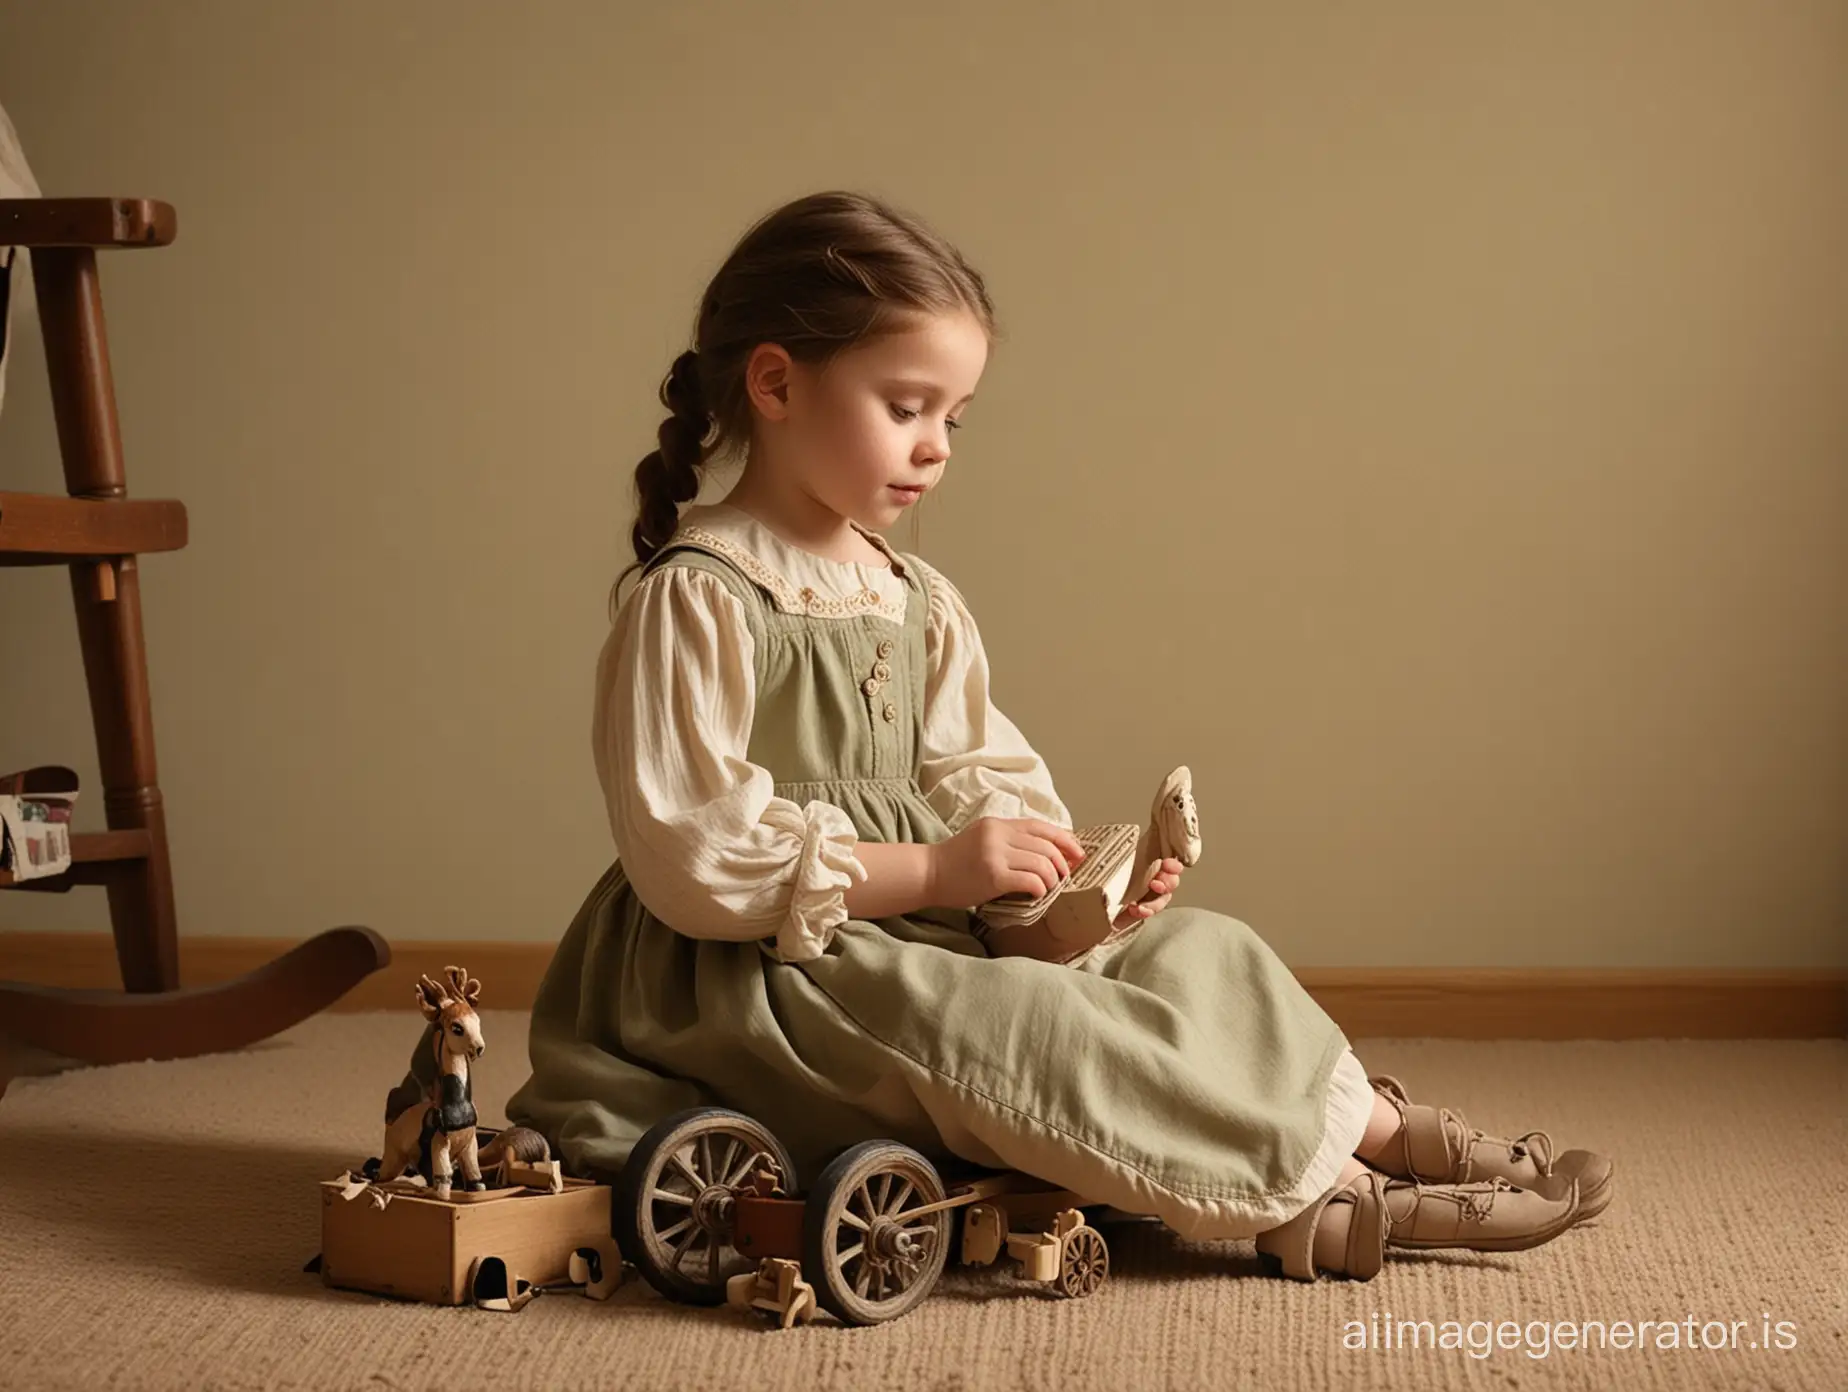 A girl, about 6 years old, sitting on the floor, filmed in profile, is intent on playing with old dusty toys, including dolls, music boxes, marionettes, and rocking horses. She is holding a music box. Style: Photorealistic Detailed, Nostalgic and melancholic atmosphere, Warm and soft, dim light. The predominant colors are soft and dusty, such as brown, beige, and sage green. Warm and welcoming atmosphere. The shadows are soft and diffuse.